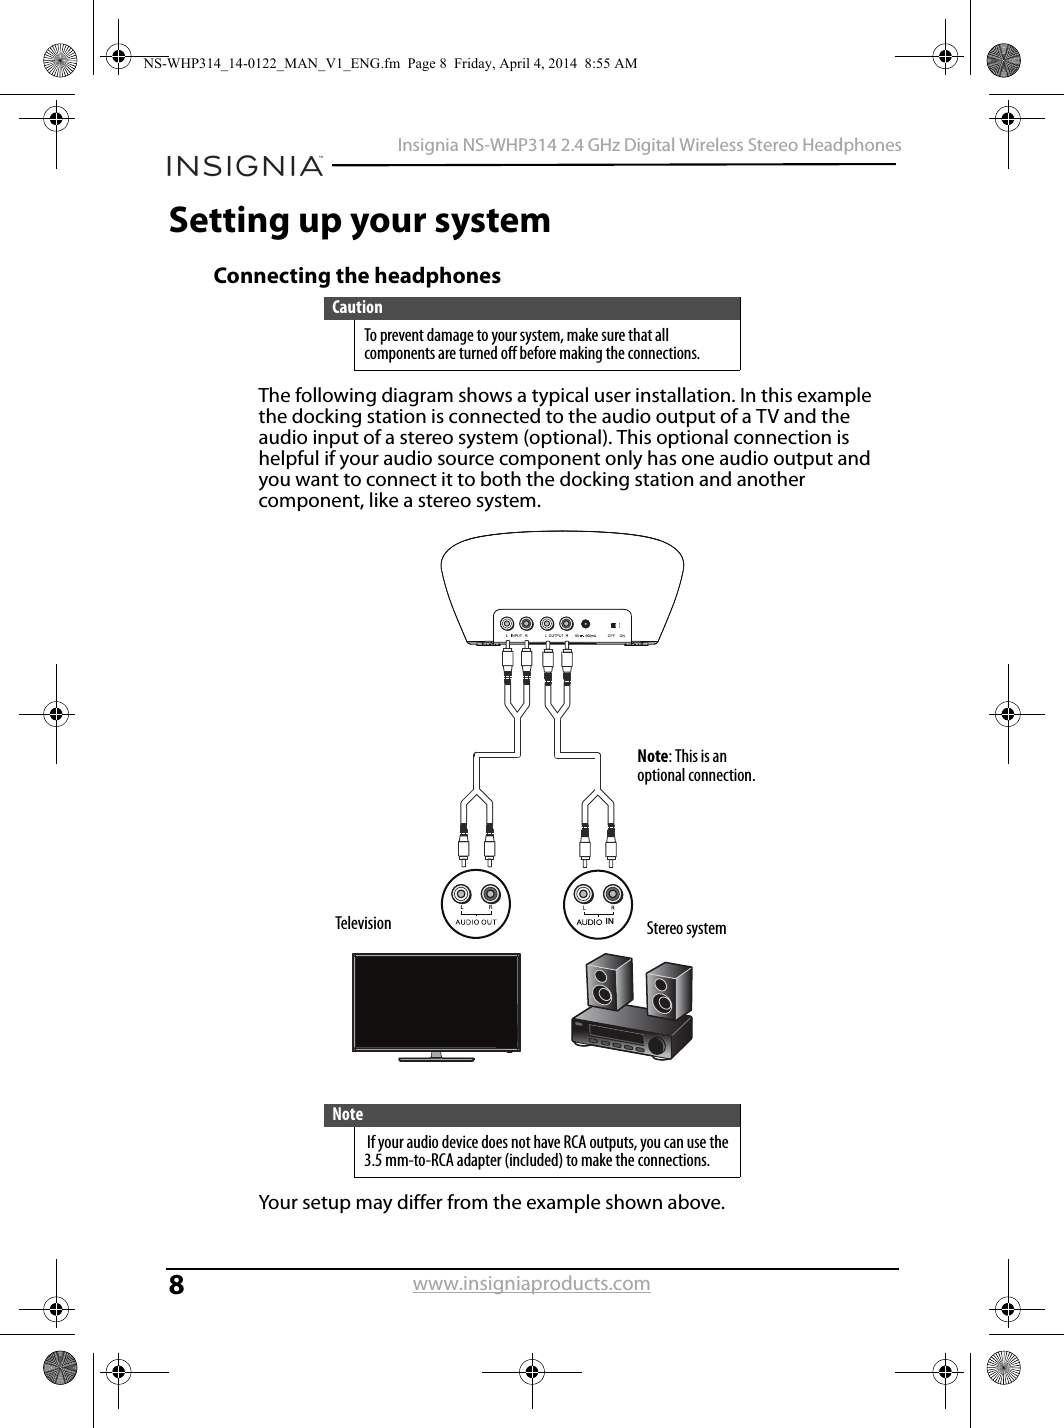 8Insignia NS-WHP314 2.4 GHz Digital Wireless Stereo Headphoneswww.insigniaproducts.comSetting up your systemConnecting the headphonesThe following diagram shows a typical user installation. In this example the docking station is connected to the audio output of a TV and the audio input of a stereo system (optional). This optional connection is helpful if your audio source component only has one audio output and you want to connect it to both the docking station and another component, like a stereo system.Your setup may differ from the example shown above.CautionTo prevent damage to your system, make sure that all components are turned off before making the connections.Note If your audio device does not have RCA outputs, you can use the 3.5 mm-to-RCA adapter (included) to make the connections.INTelevision Stereo systemNote: This is an optional connection.NS-WHP314_14-0122_MAN_V1_ENG.fm  Page 8  Friday, April 4, 2014  8:55 AM